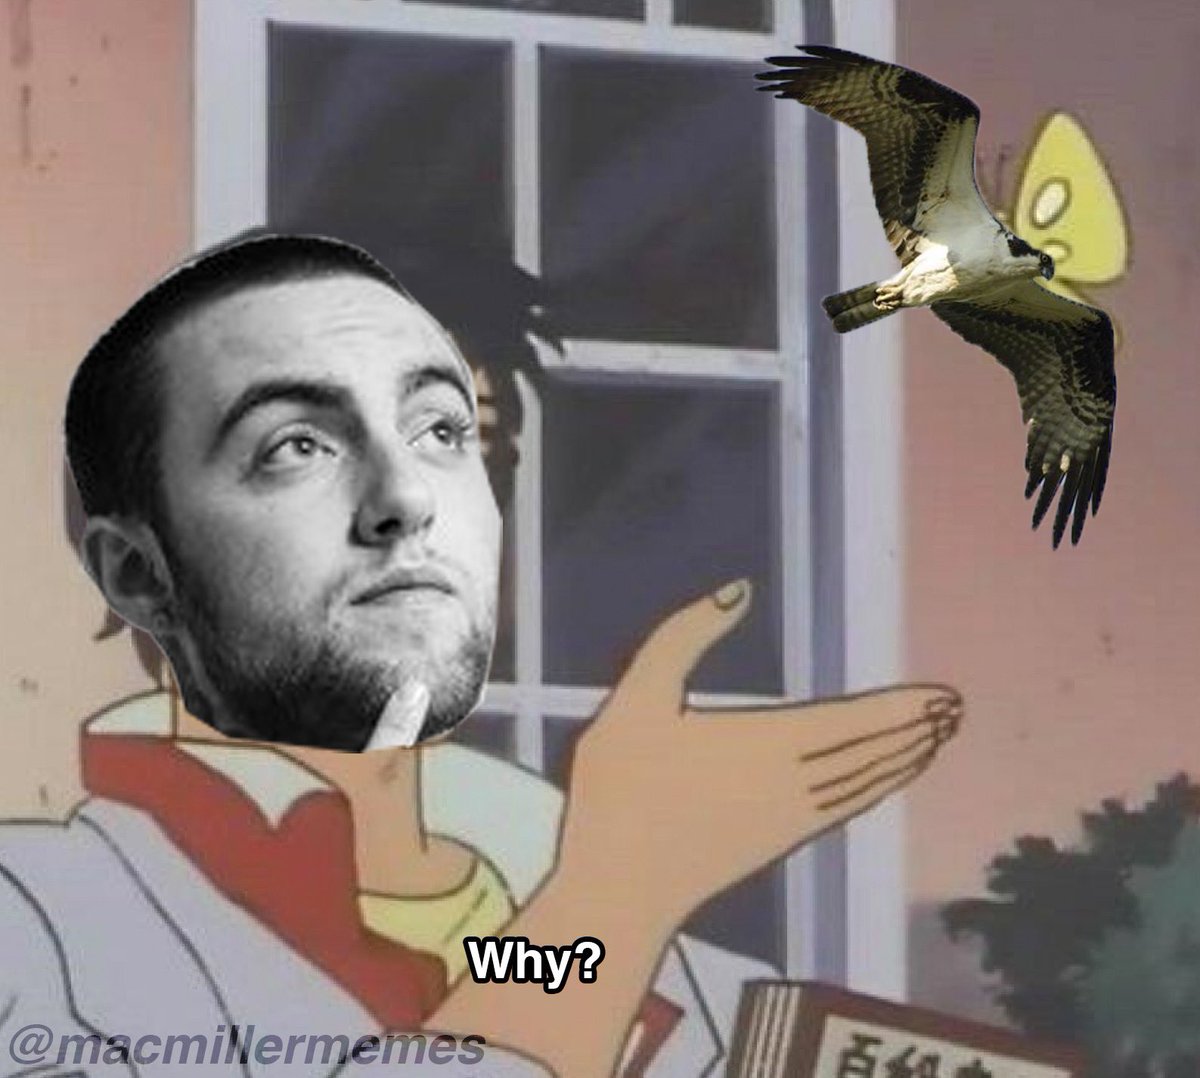 Mac Miller Memes On Twitter There S A Bird In The Sky Look At Him Fly. 